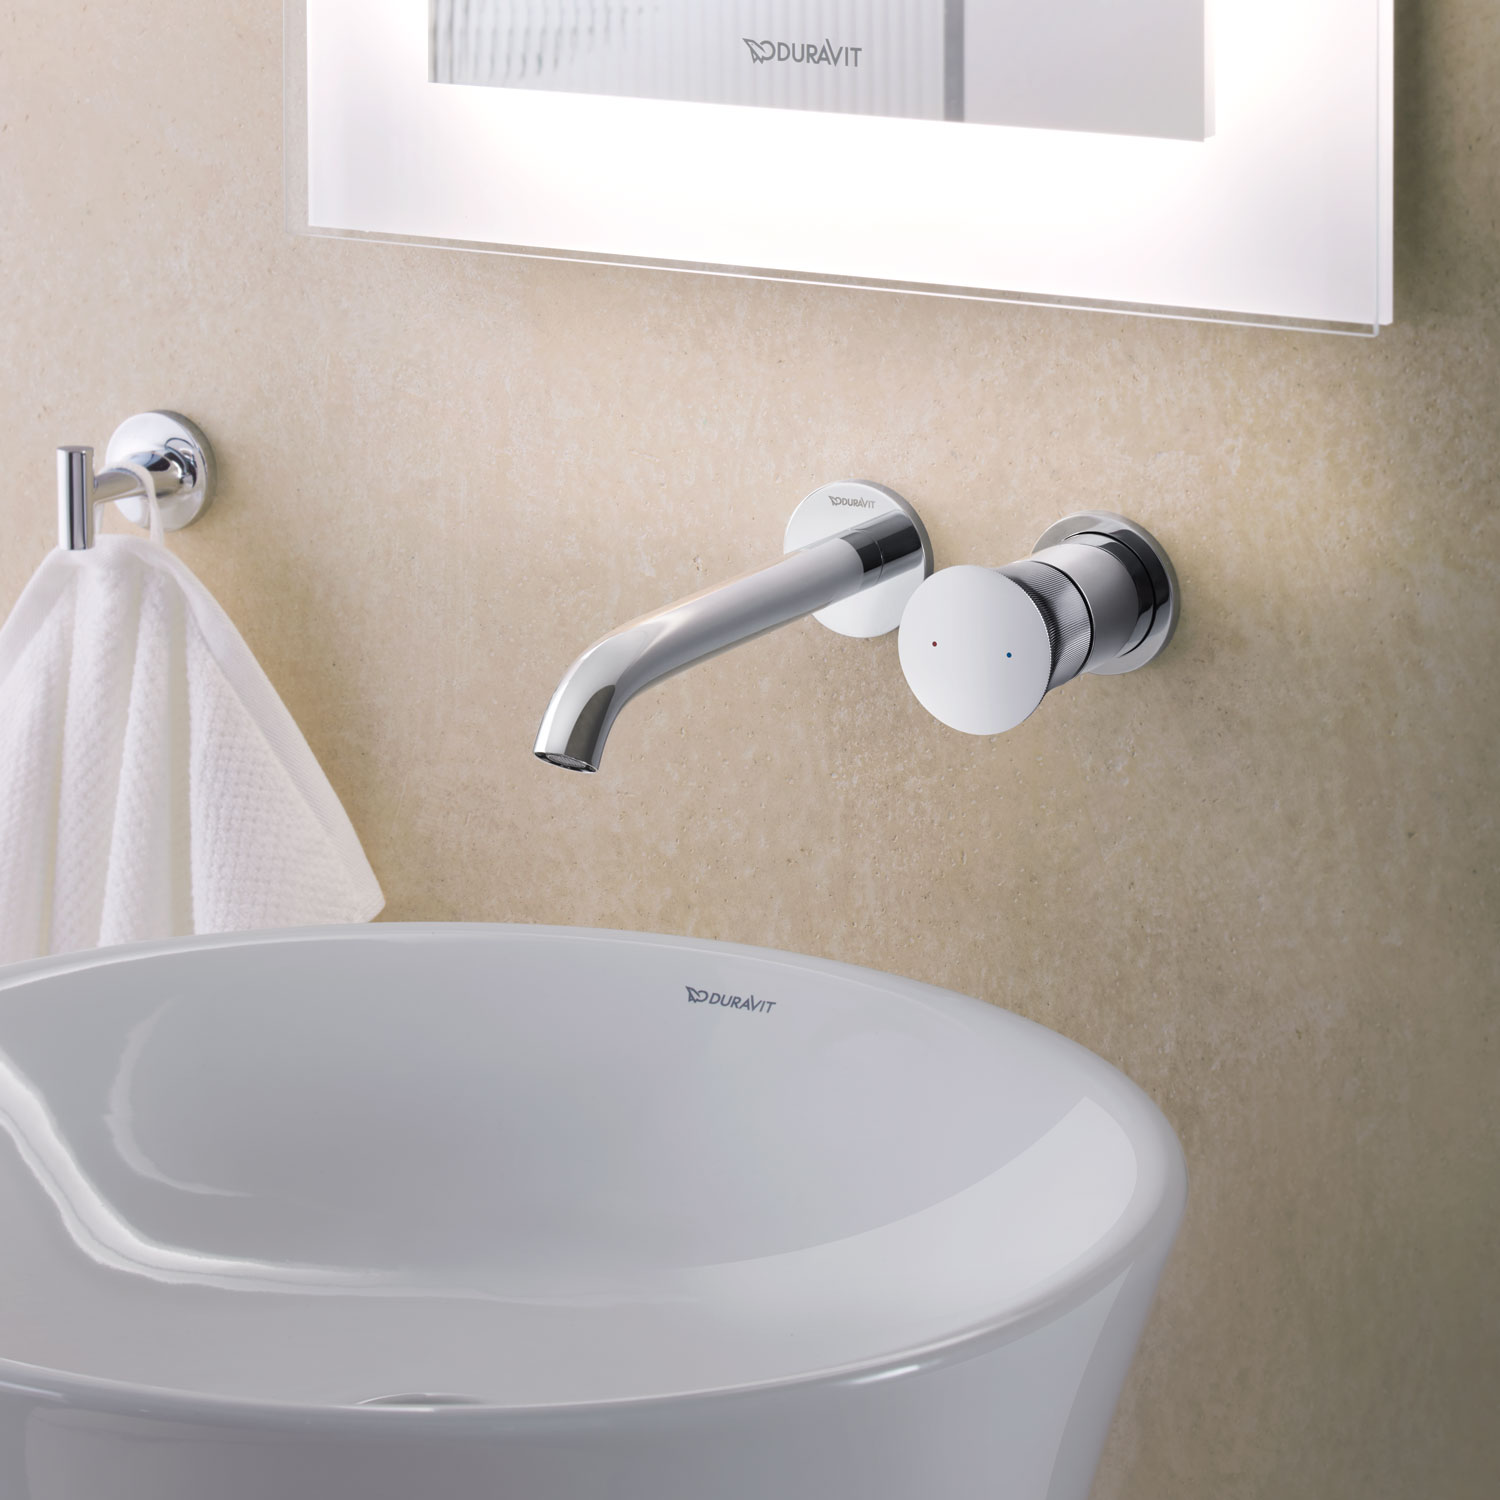 WhiteTulip concealed faucet

